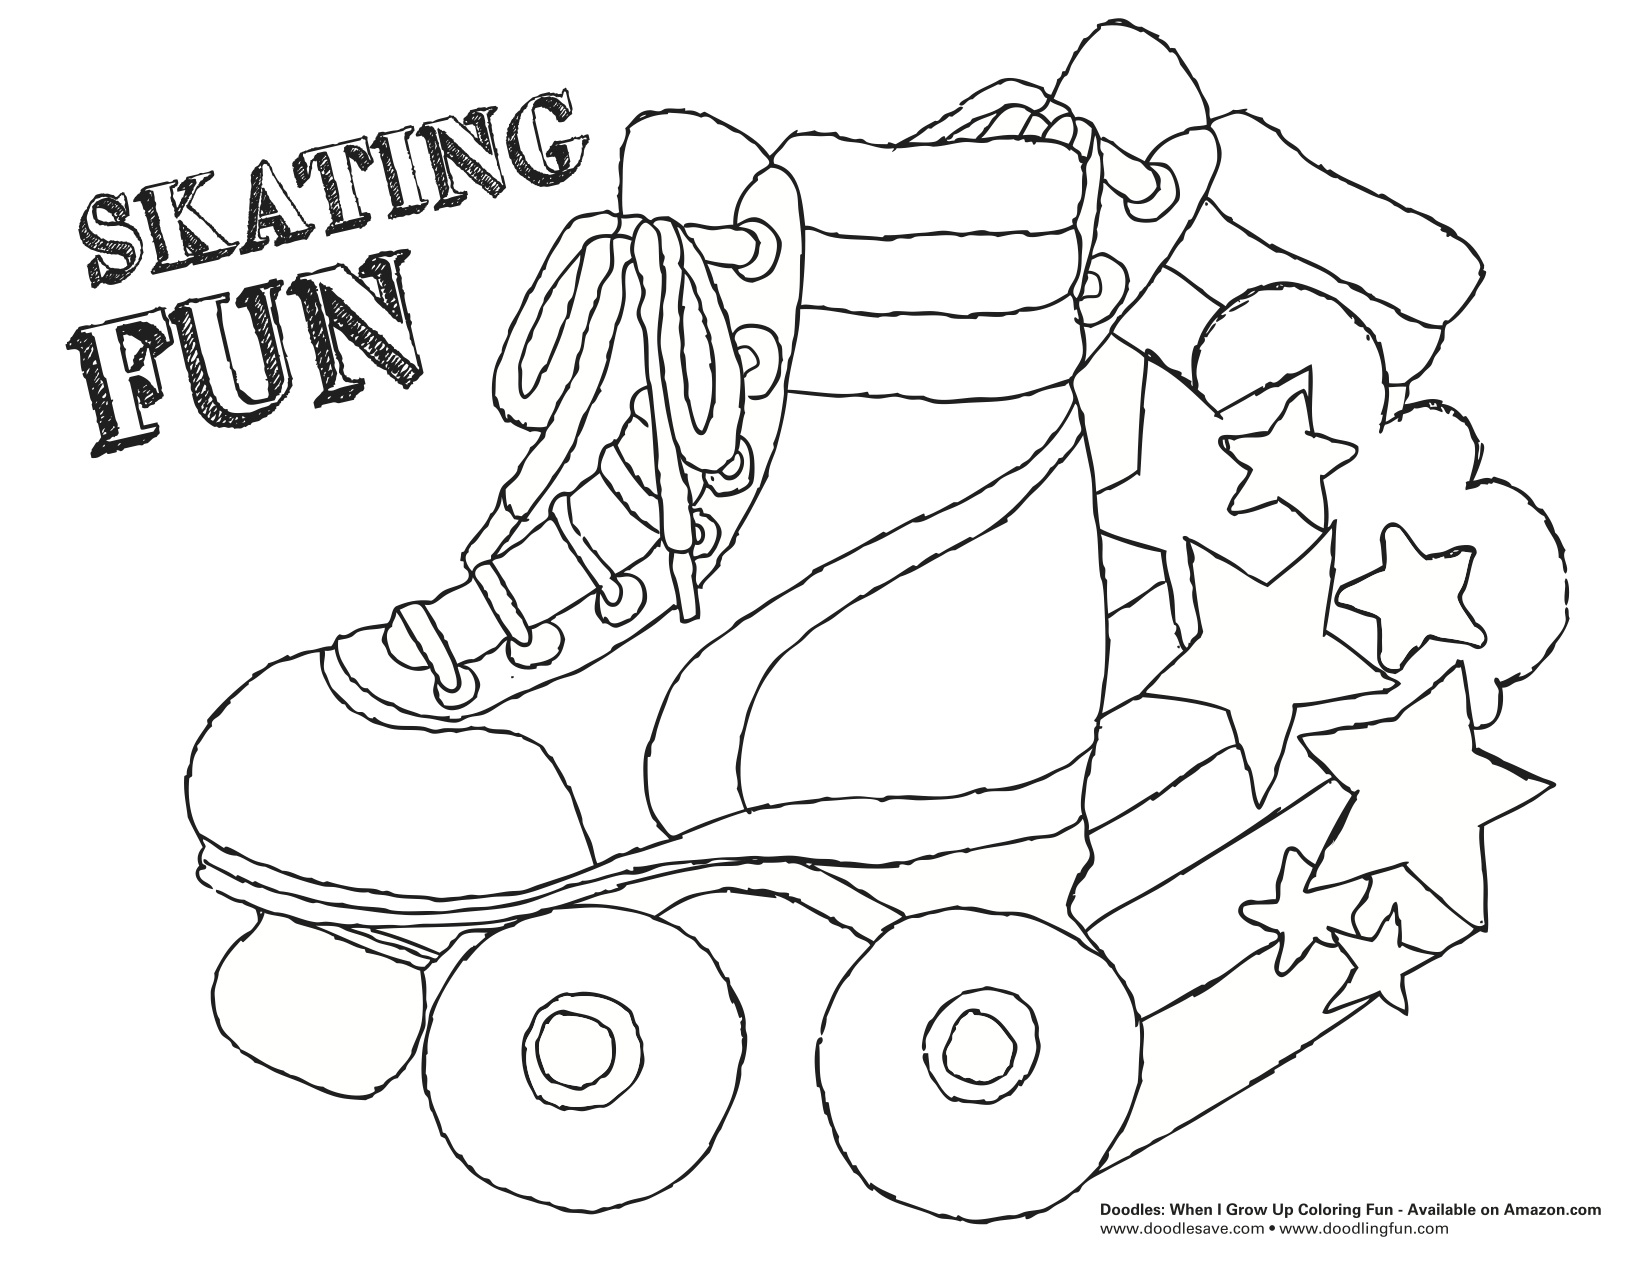 Roller skating coloring pages